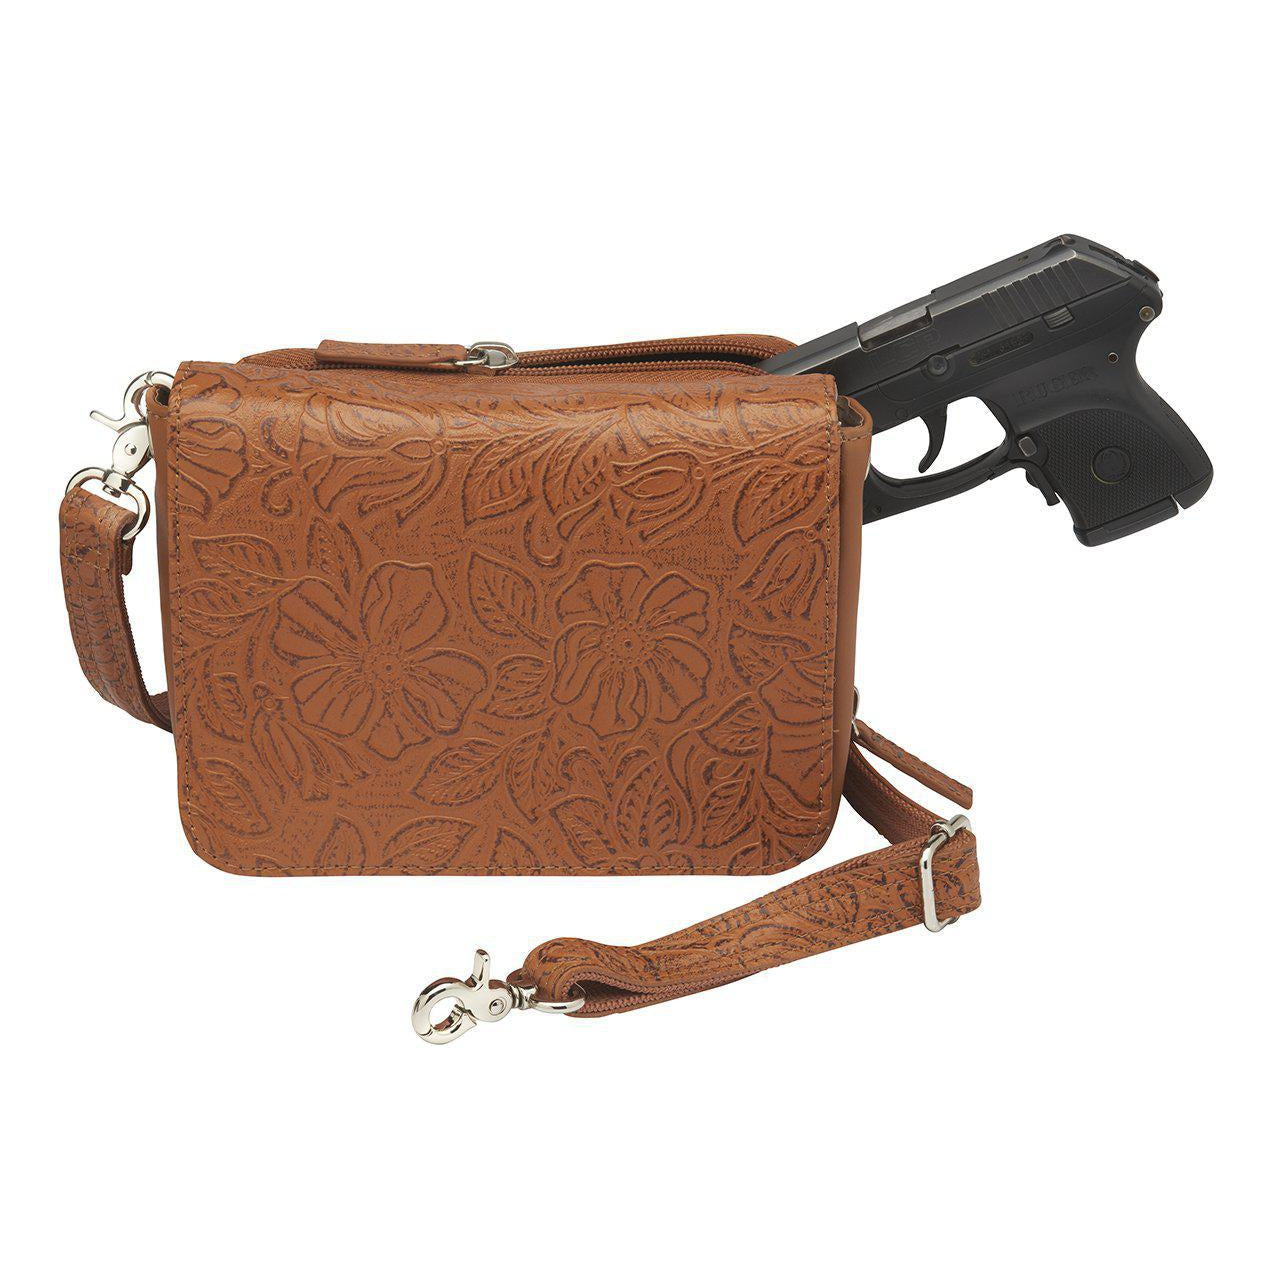 GTM Small Concealed Carry Bags Make Perfect Companions